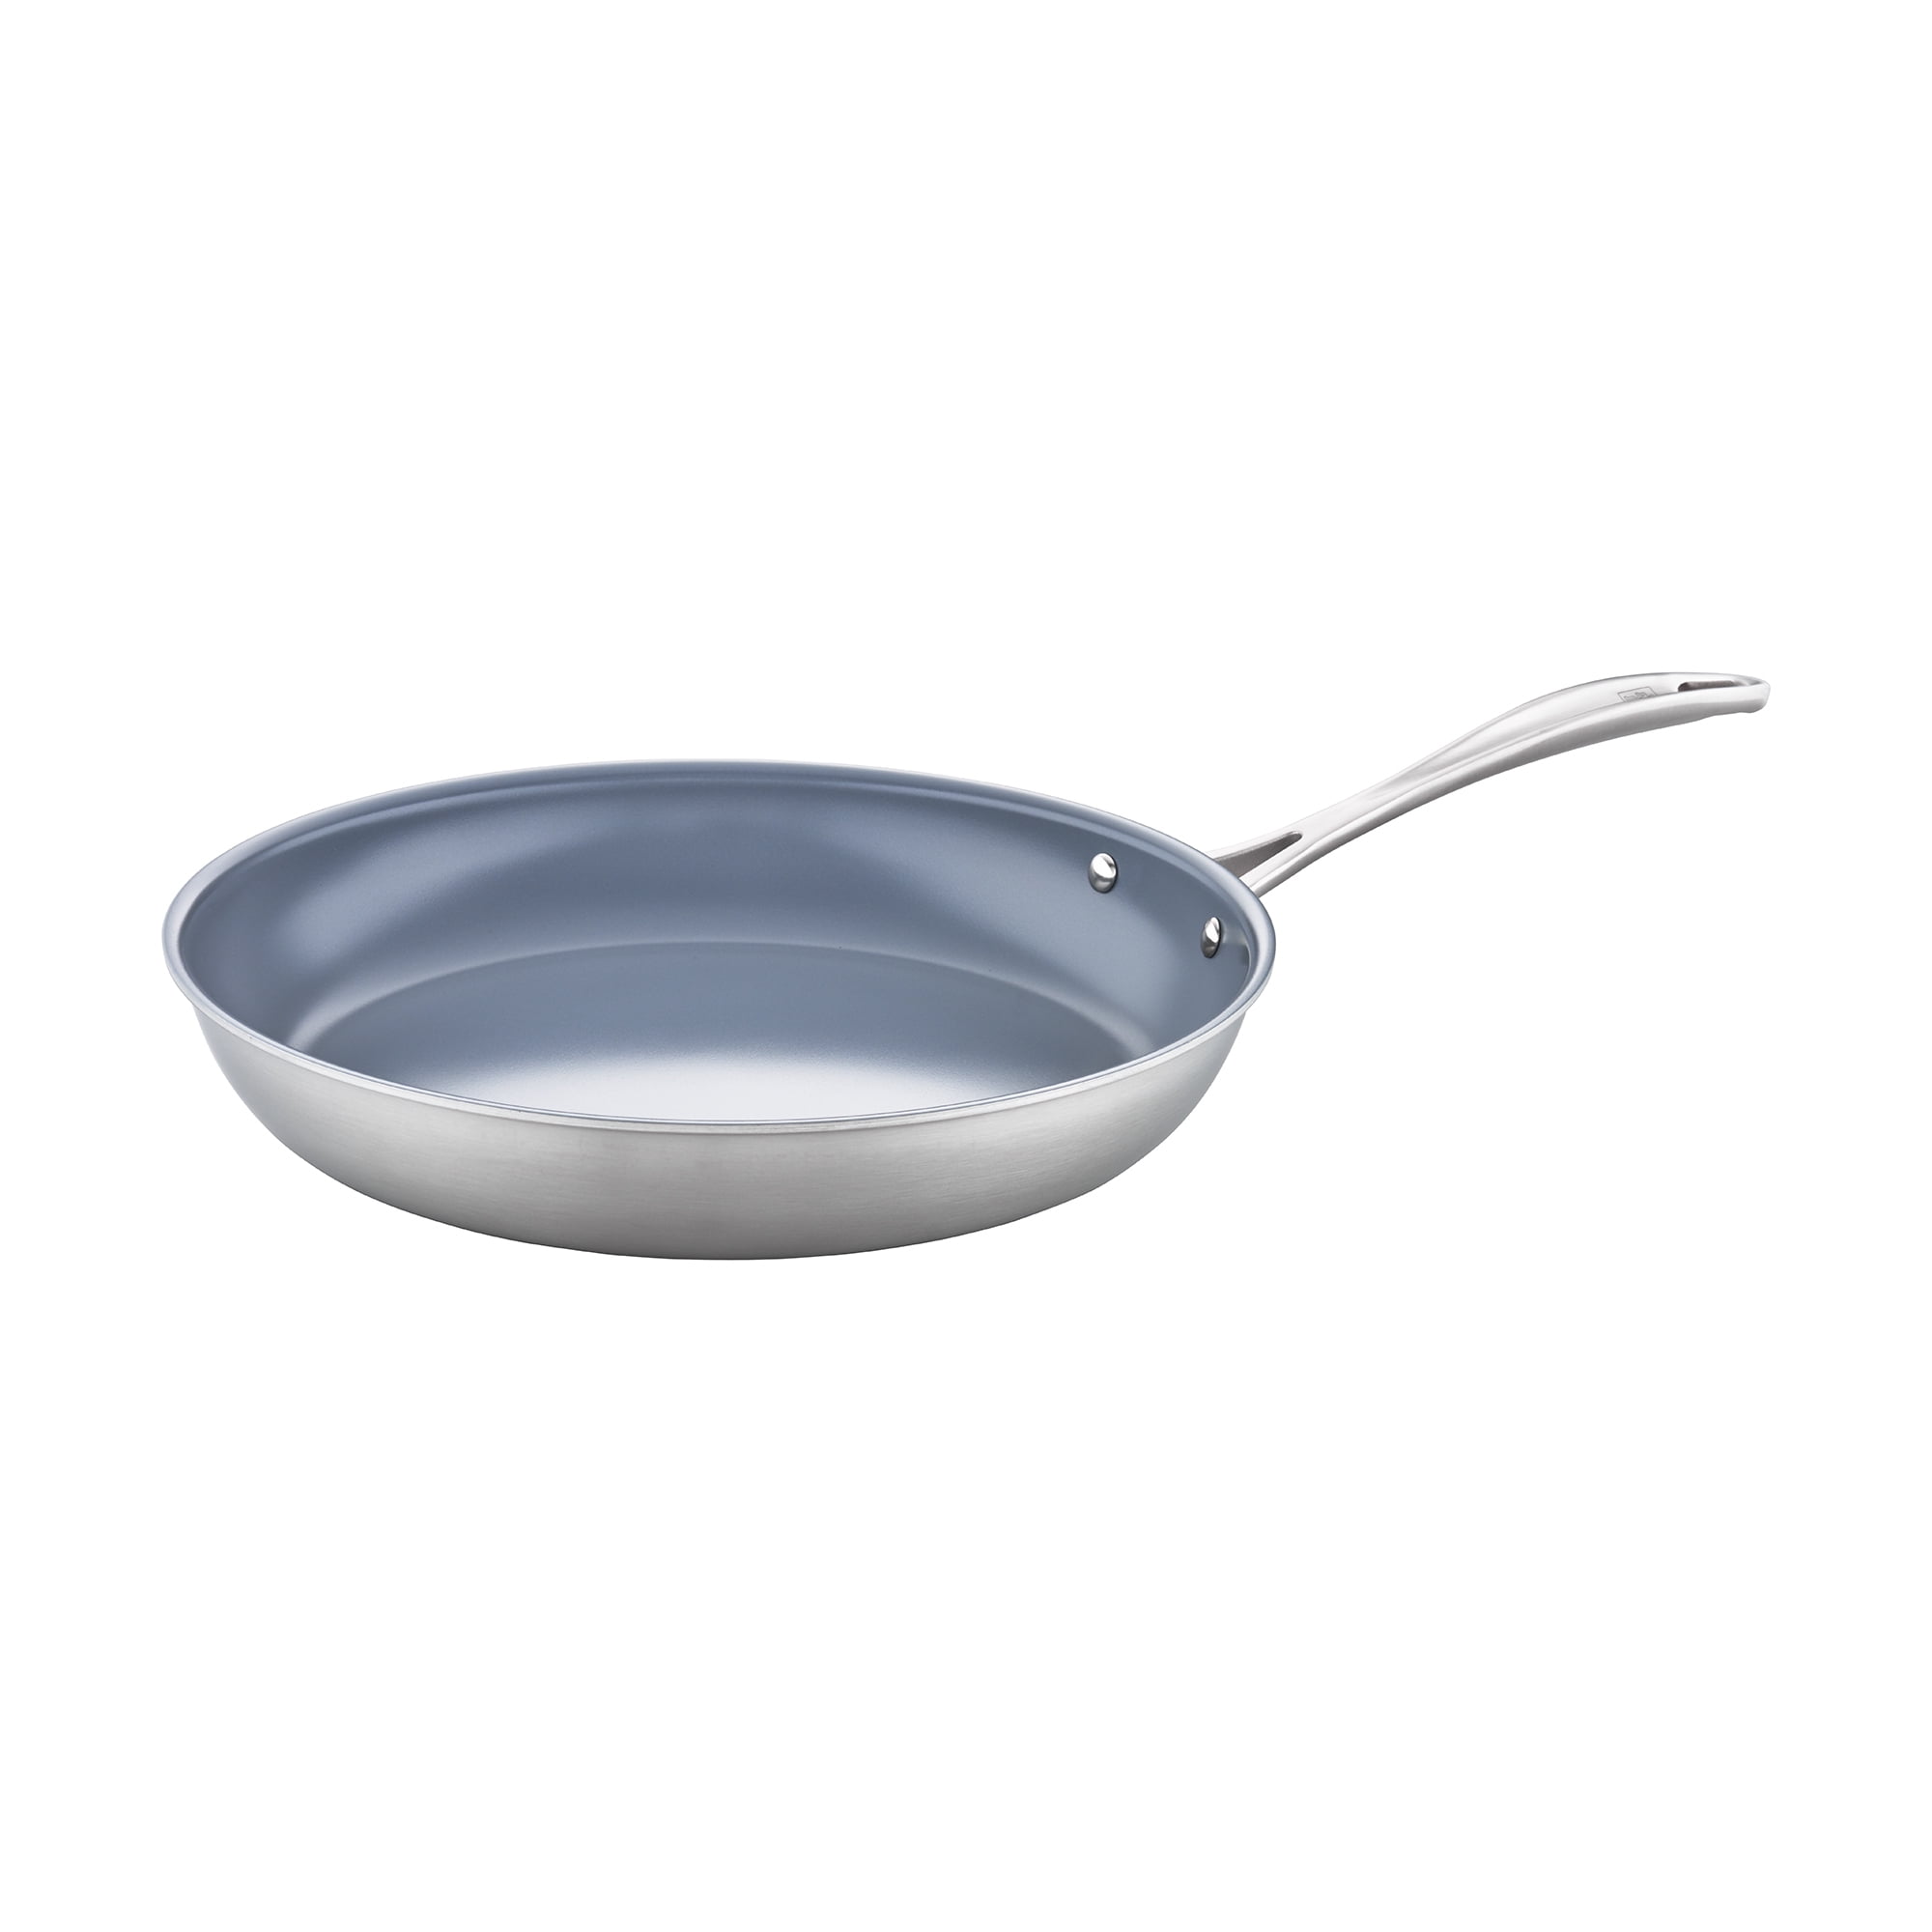 Henckels 64089-300 ZWILLING Spirit 3-ply 12 Stainless Steel Ceramic Nonstick Griddle ZWILLING J.A 